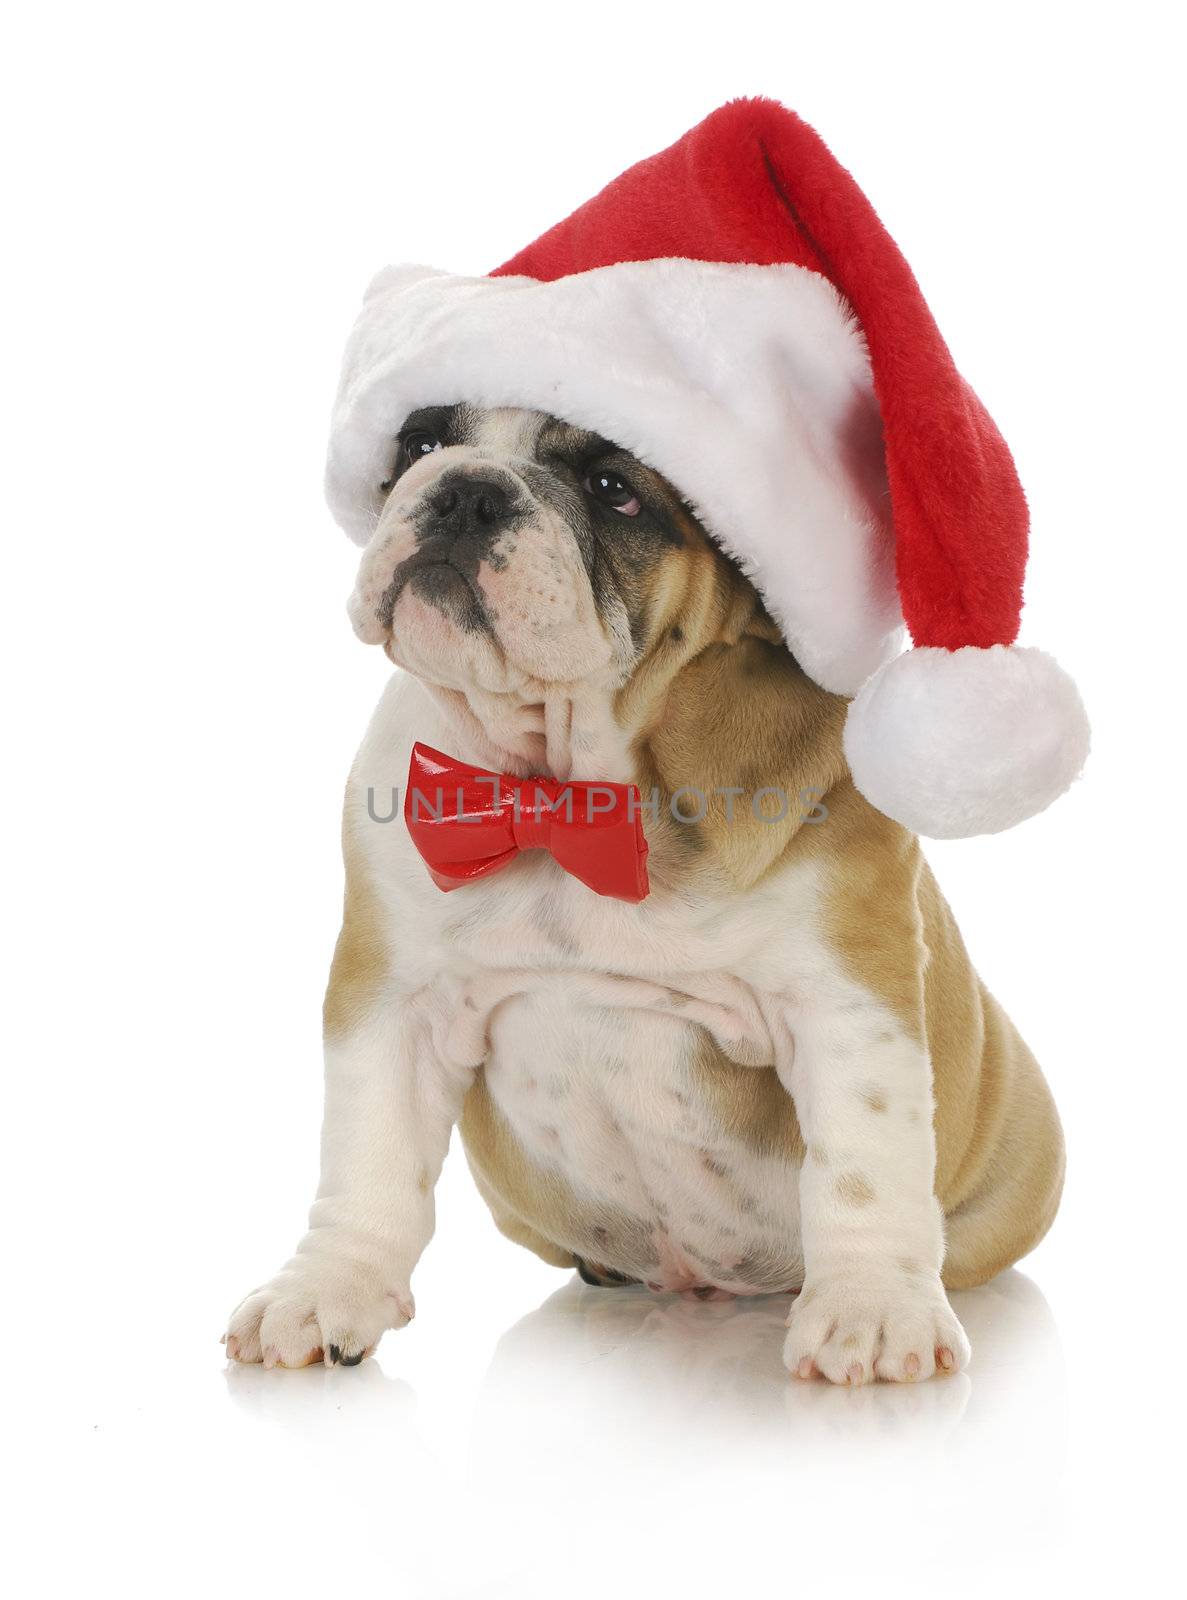 santa puppy - english bulldog wearing santa hat and bowtie with reflection on white background